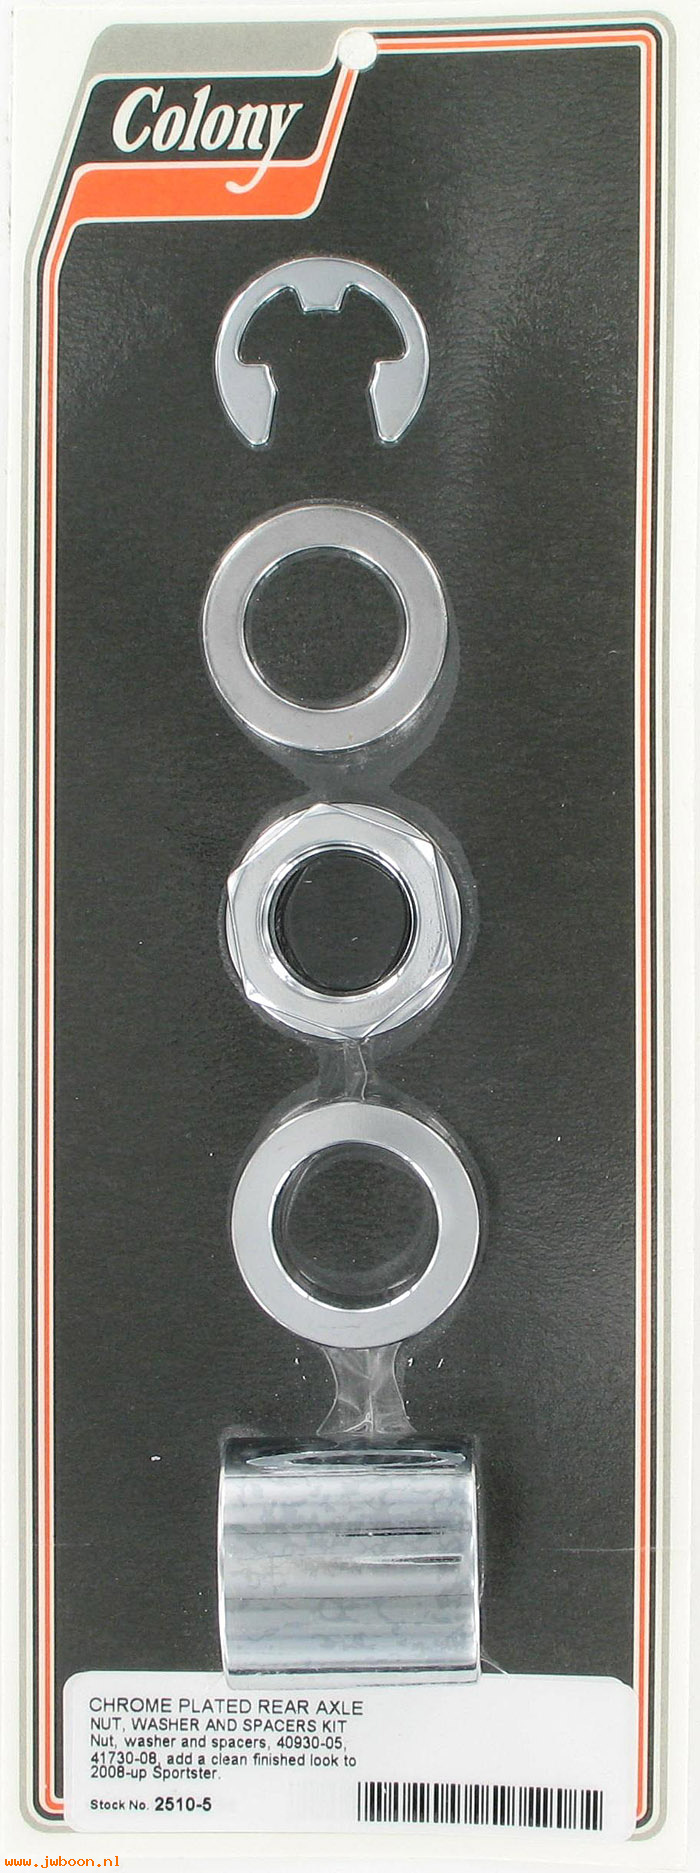 C 2510-5 (40930-05 / 41730-08): Rear axle spacer kit - smooth, in stock - Sportster, XL '08-